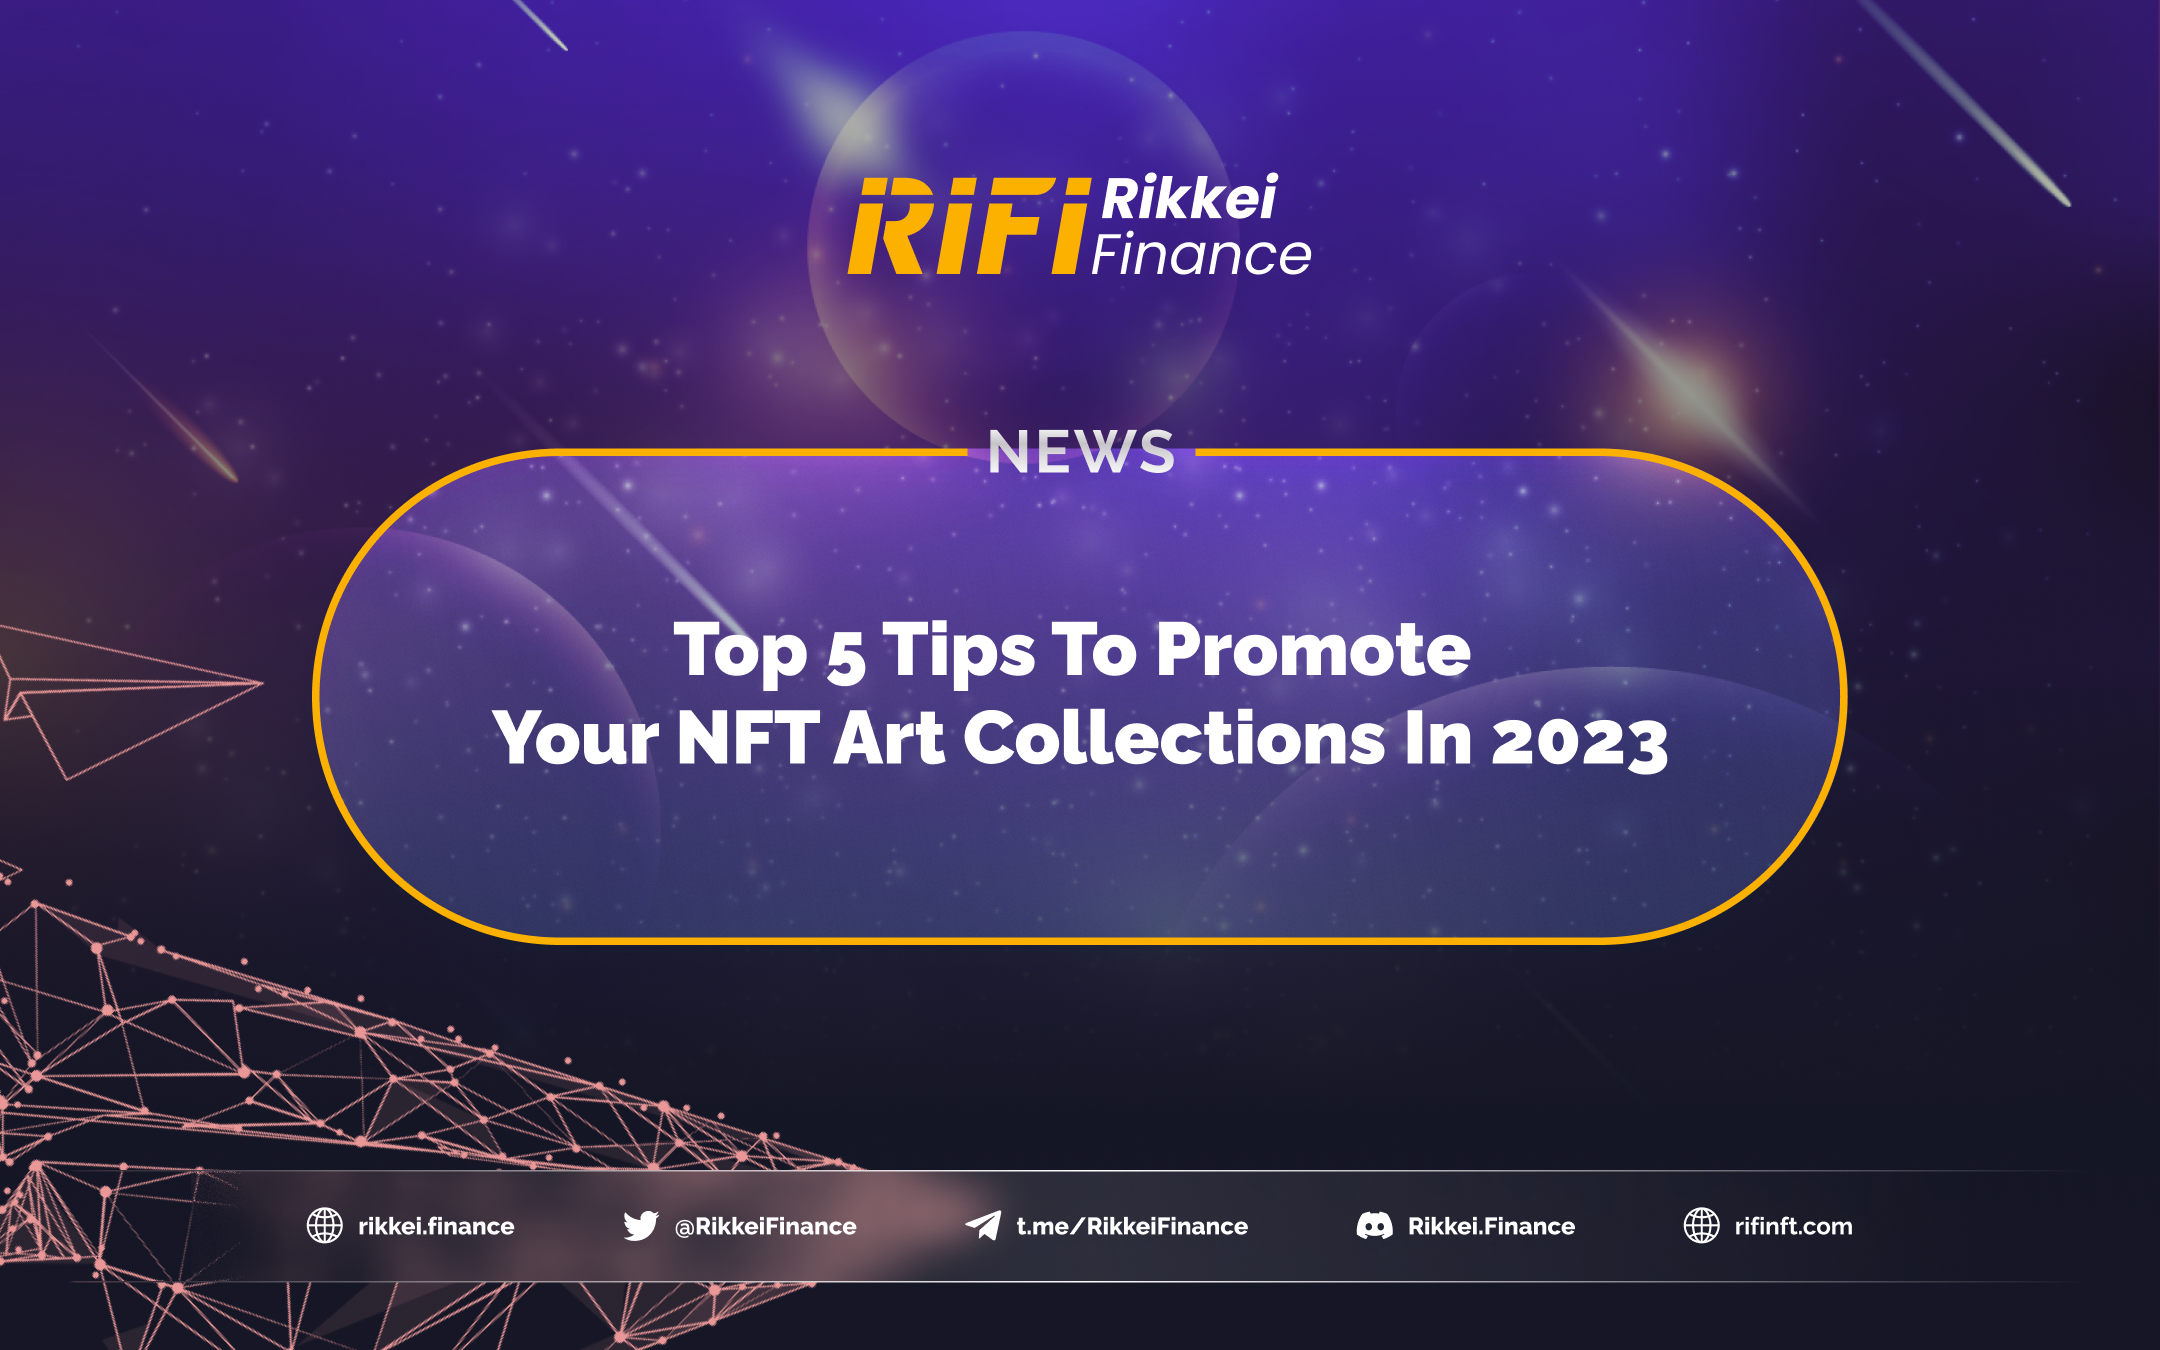 Top 5 Tips To Promote NFT Art Collections In 2023